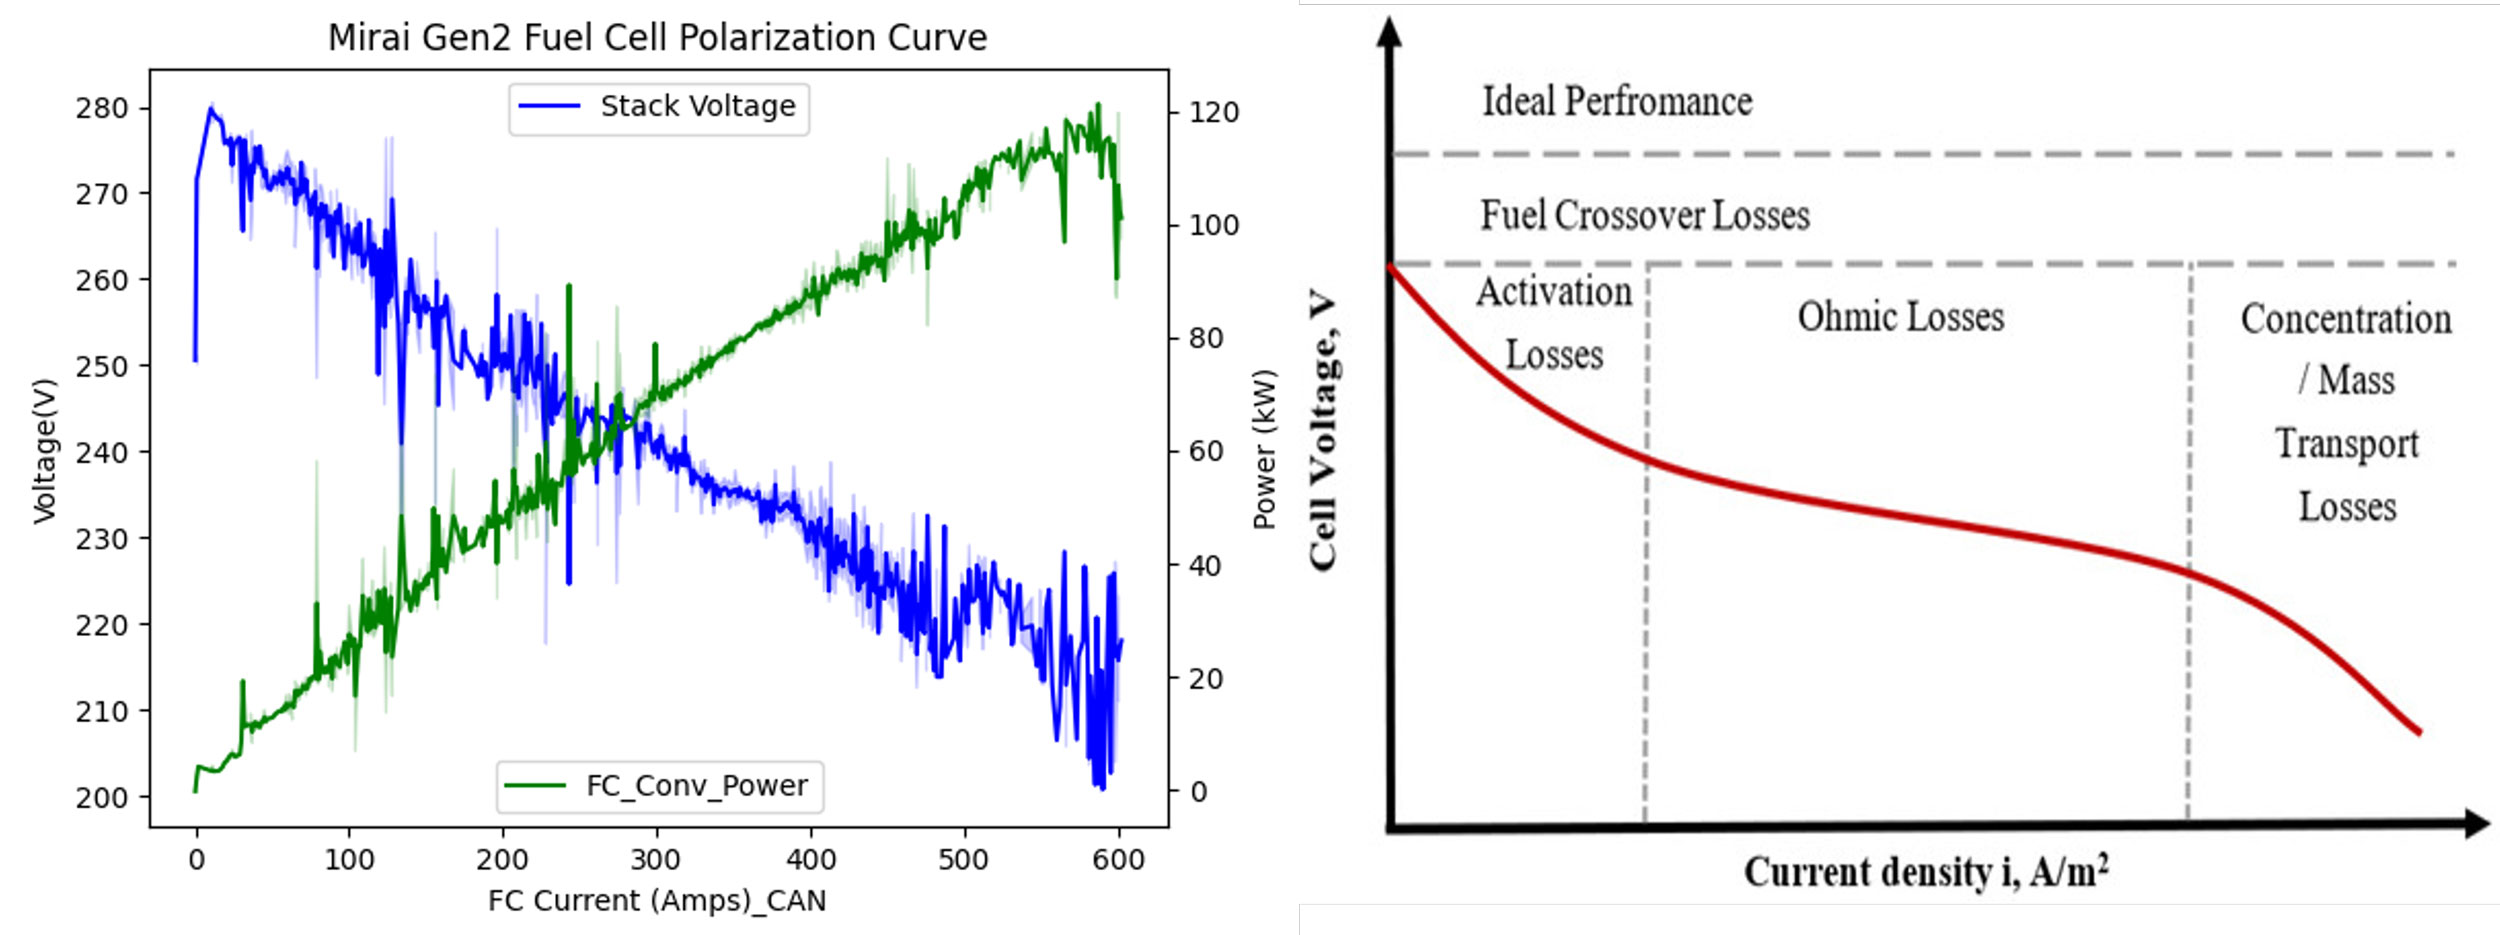 Two graphs of the Toyota Mirai Gen II fuel cell polarization curve 